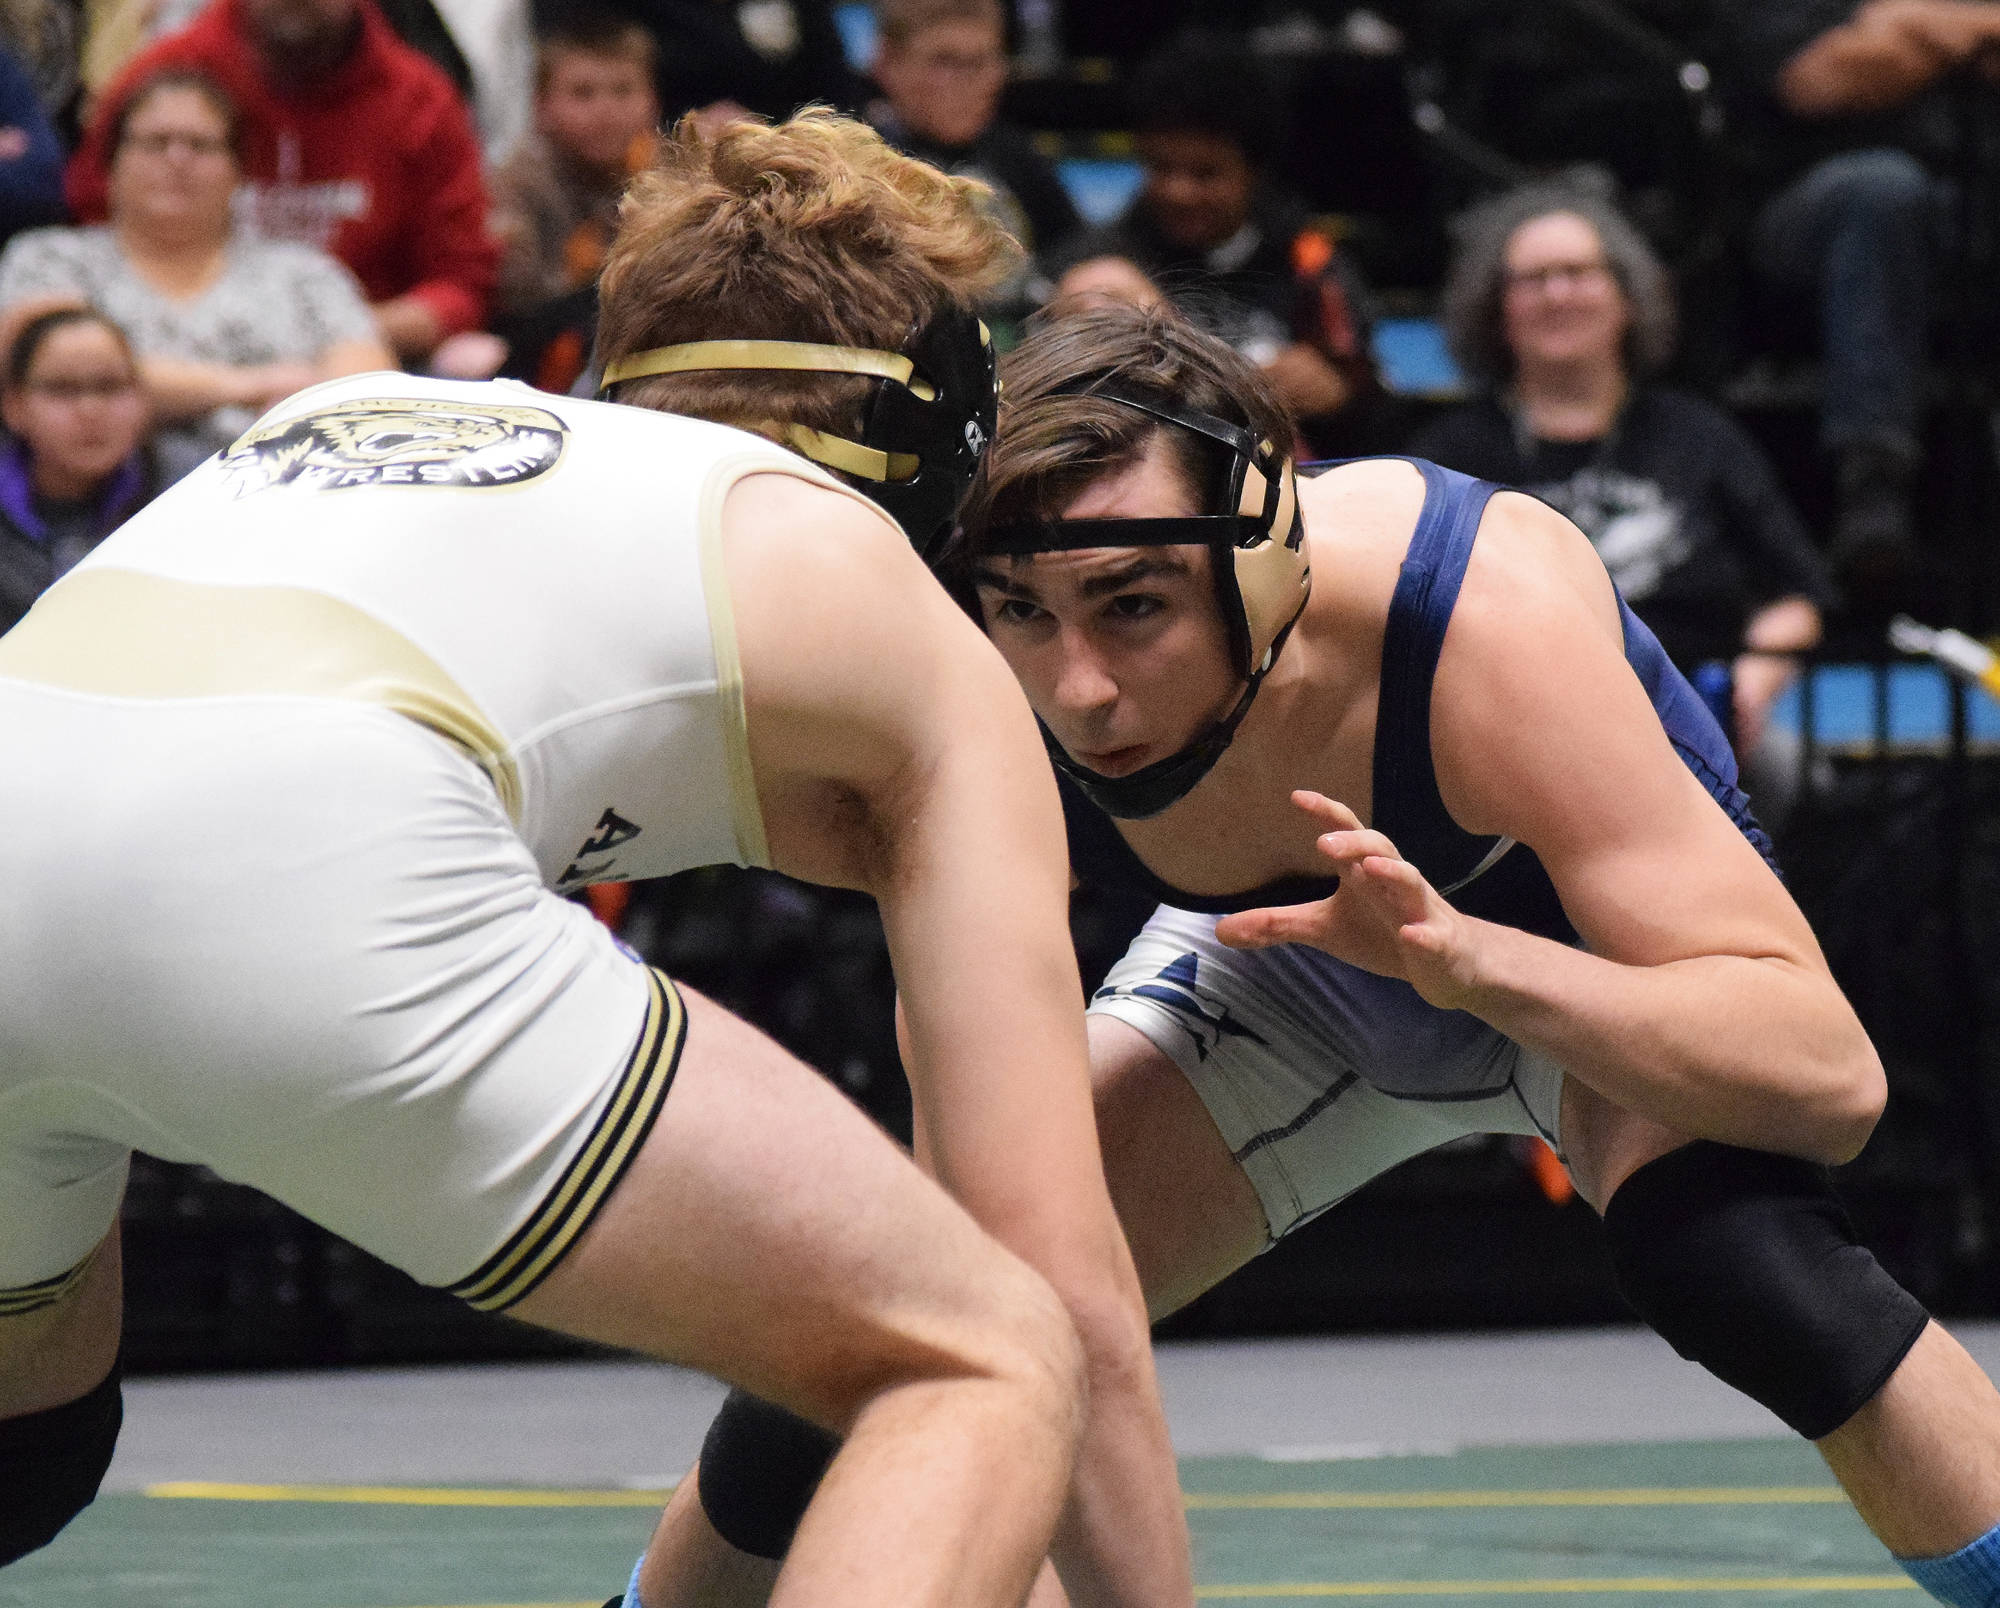 Soldotna senior Gideon Hutchison takes on South’s Jacob Shack in the 130-pound final Saturday night at the Div. I state wrestling championships at the Alaska Airlines Center in Anchorage. (Photo by Joey Klecka/Peninsula Clarion)